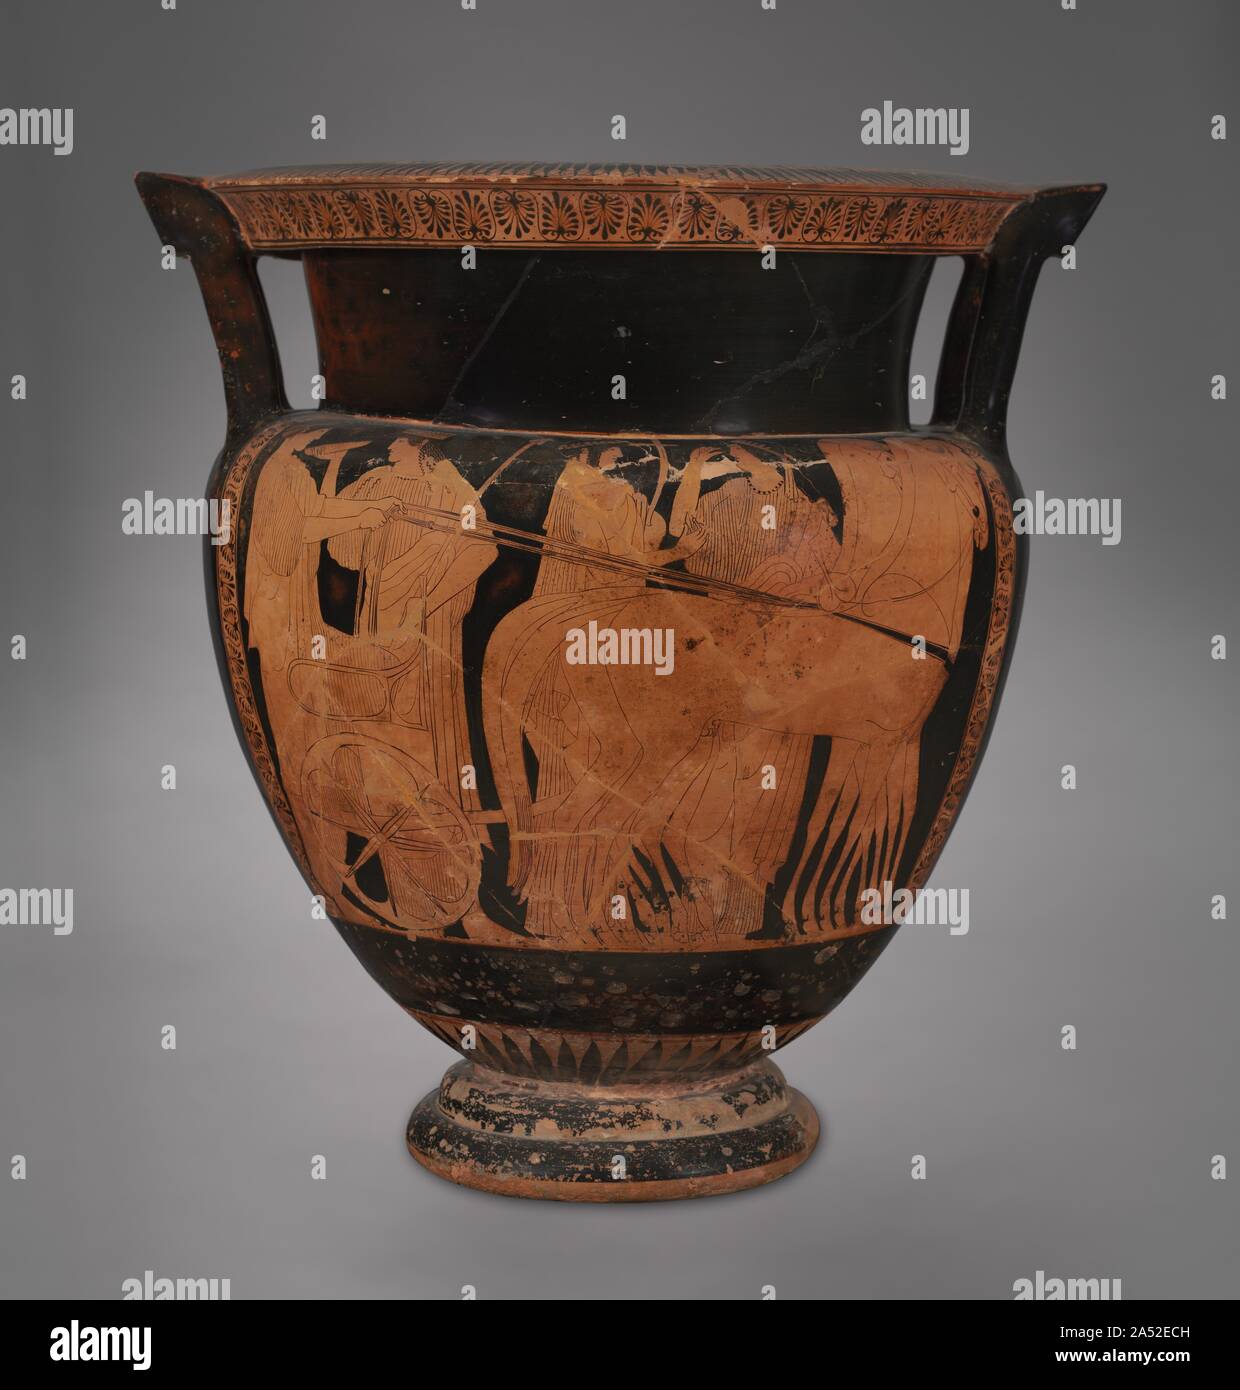 The Cleveland Krater, c. 470-460 BC. Since this column krater is the most important of 12 vases painted by a Greek artist whose name is unknown, the great English vase expert, Sir John D. Beazley, named both the vase and the painter after our city. Other vases by this painter are in New York, Vienna, Paris, and Copenhagen. Front: The scene on this side may represent Hebe, the daughter of Zeus and Hera, on her way to meet her future husband, Herakles. Back: On this side of the vase, drunken revelers return from a symposium, a drinking party at which wine was served from huge vessels like this o Stock Photo